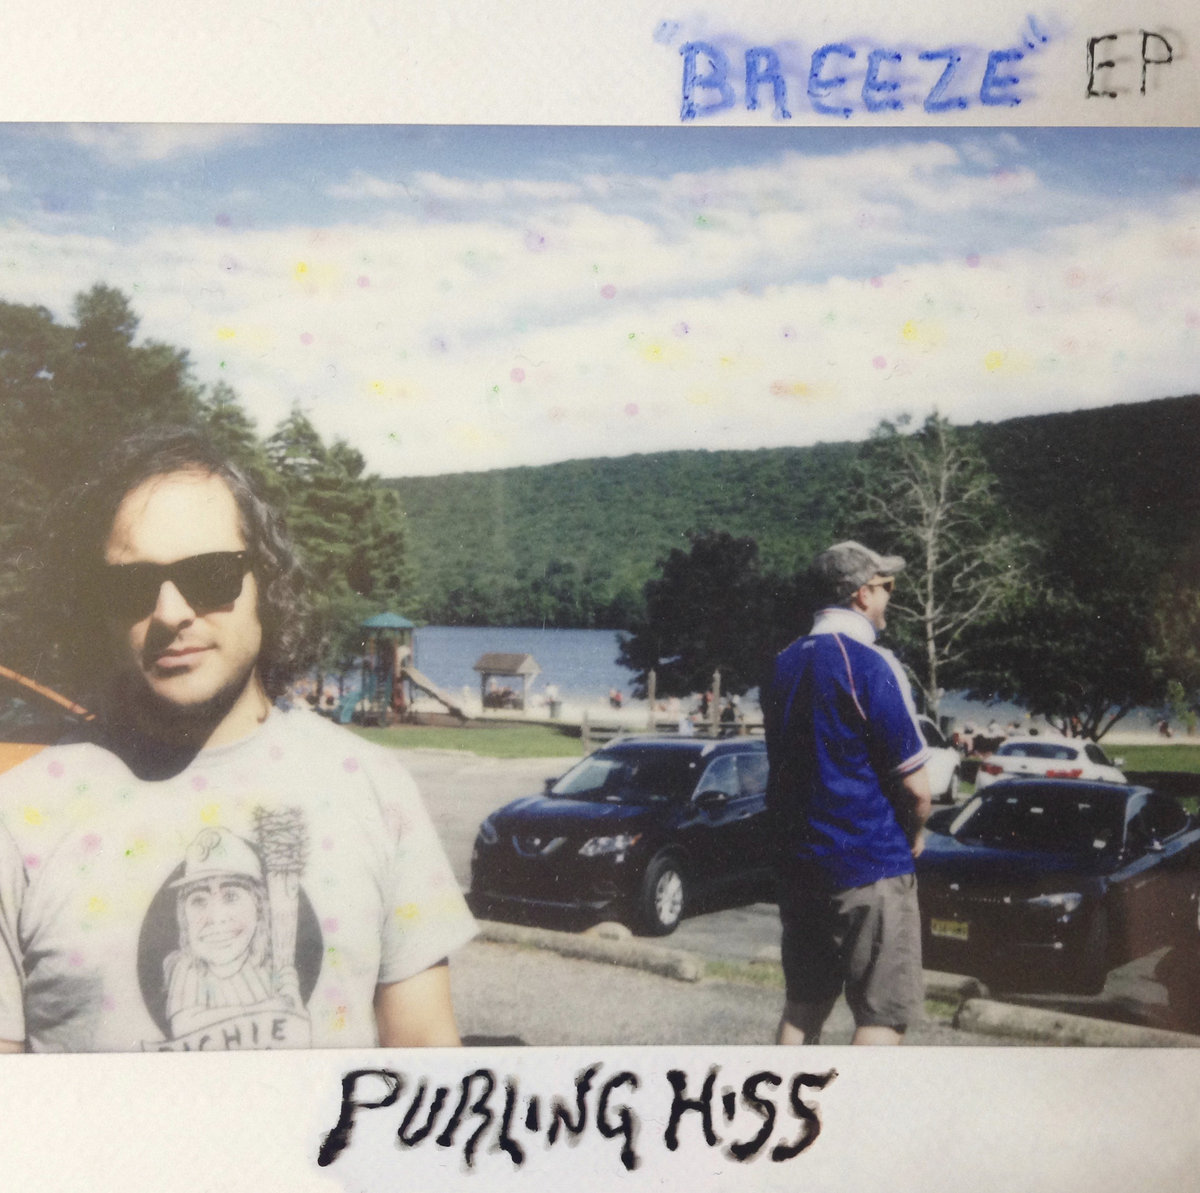 Purling Hiss Announce 'High Bias' LP, Share Riffing Lead Single 'Fever'